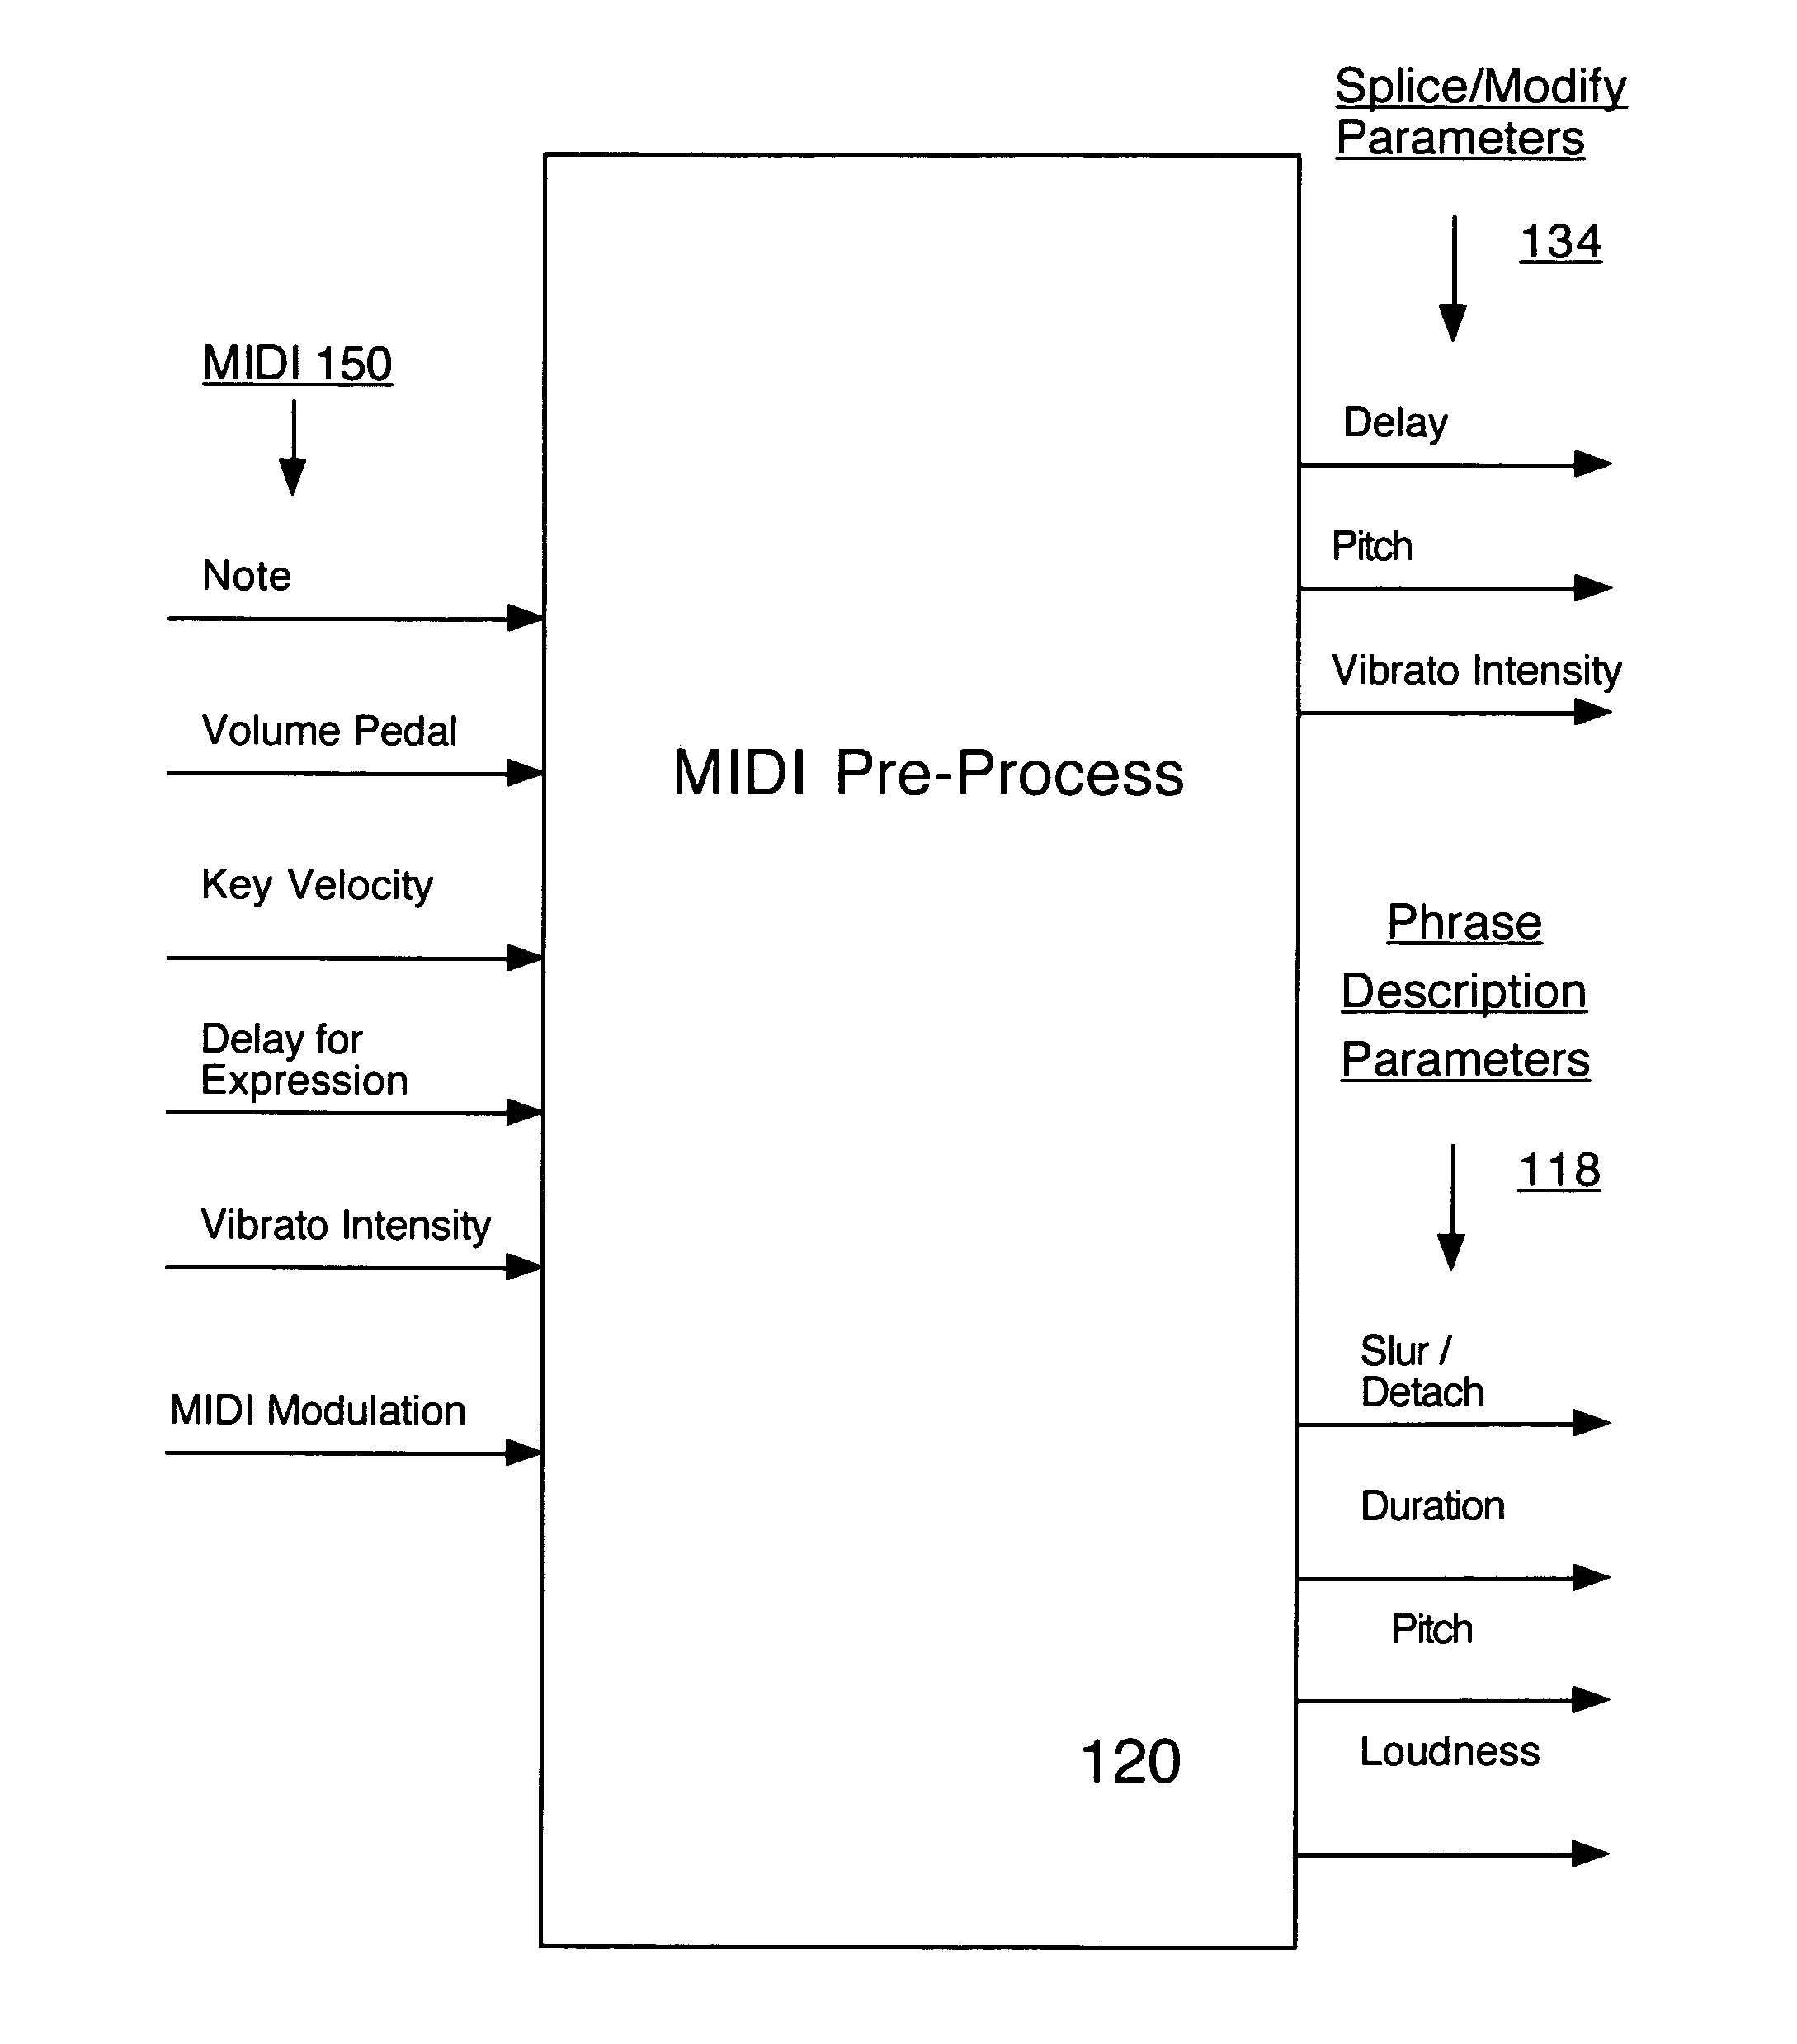 Sound synthesis incorporating delay for expression